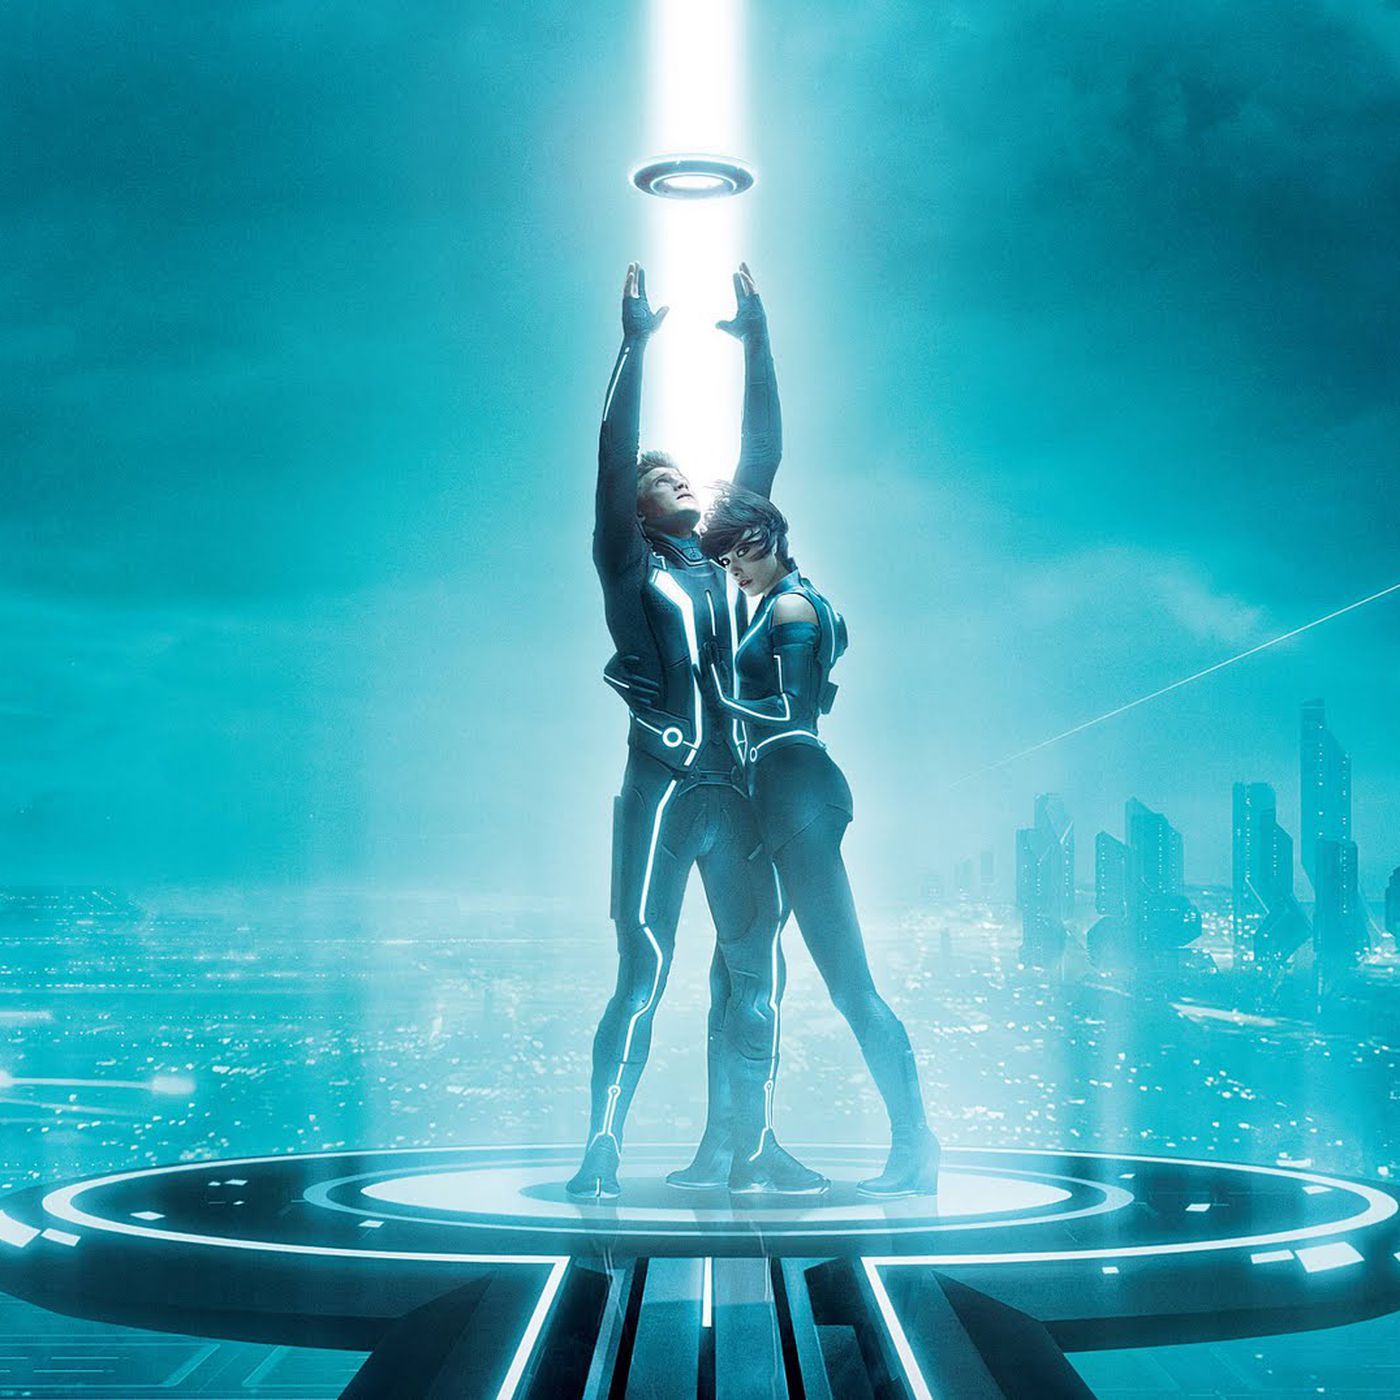 Disney is considering booting up a new sequel to Tron: Legacy